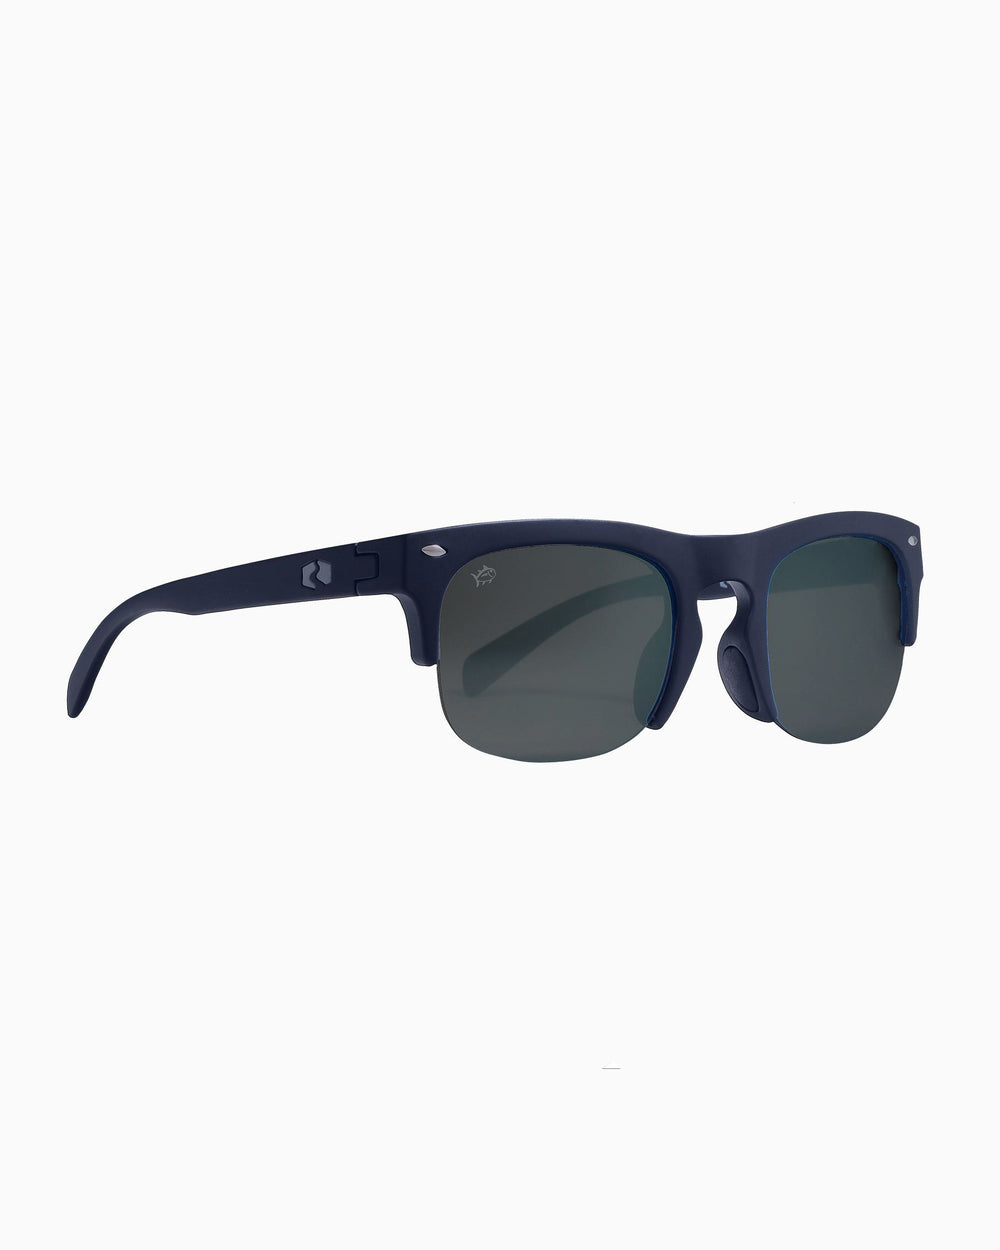 The side of the Men's Rheos Sullivans Sunglasses by Southern Tide - Boat Blue Gunmetal